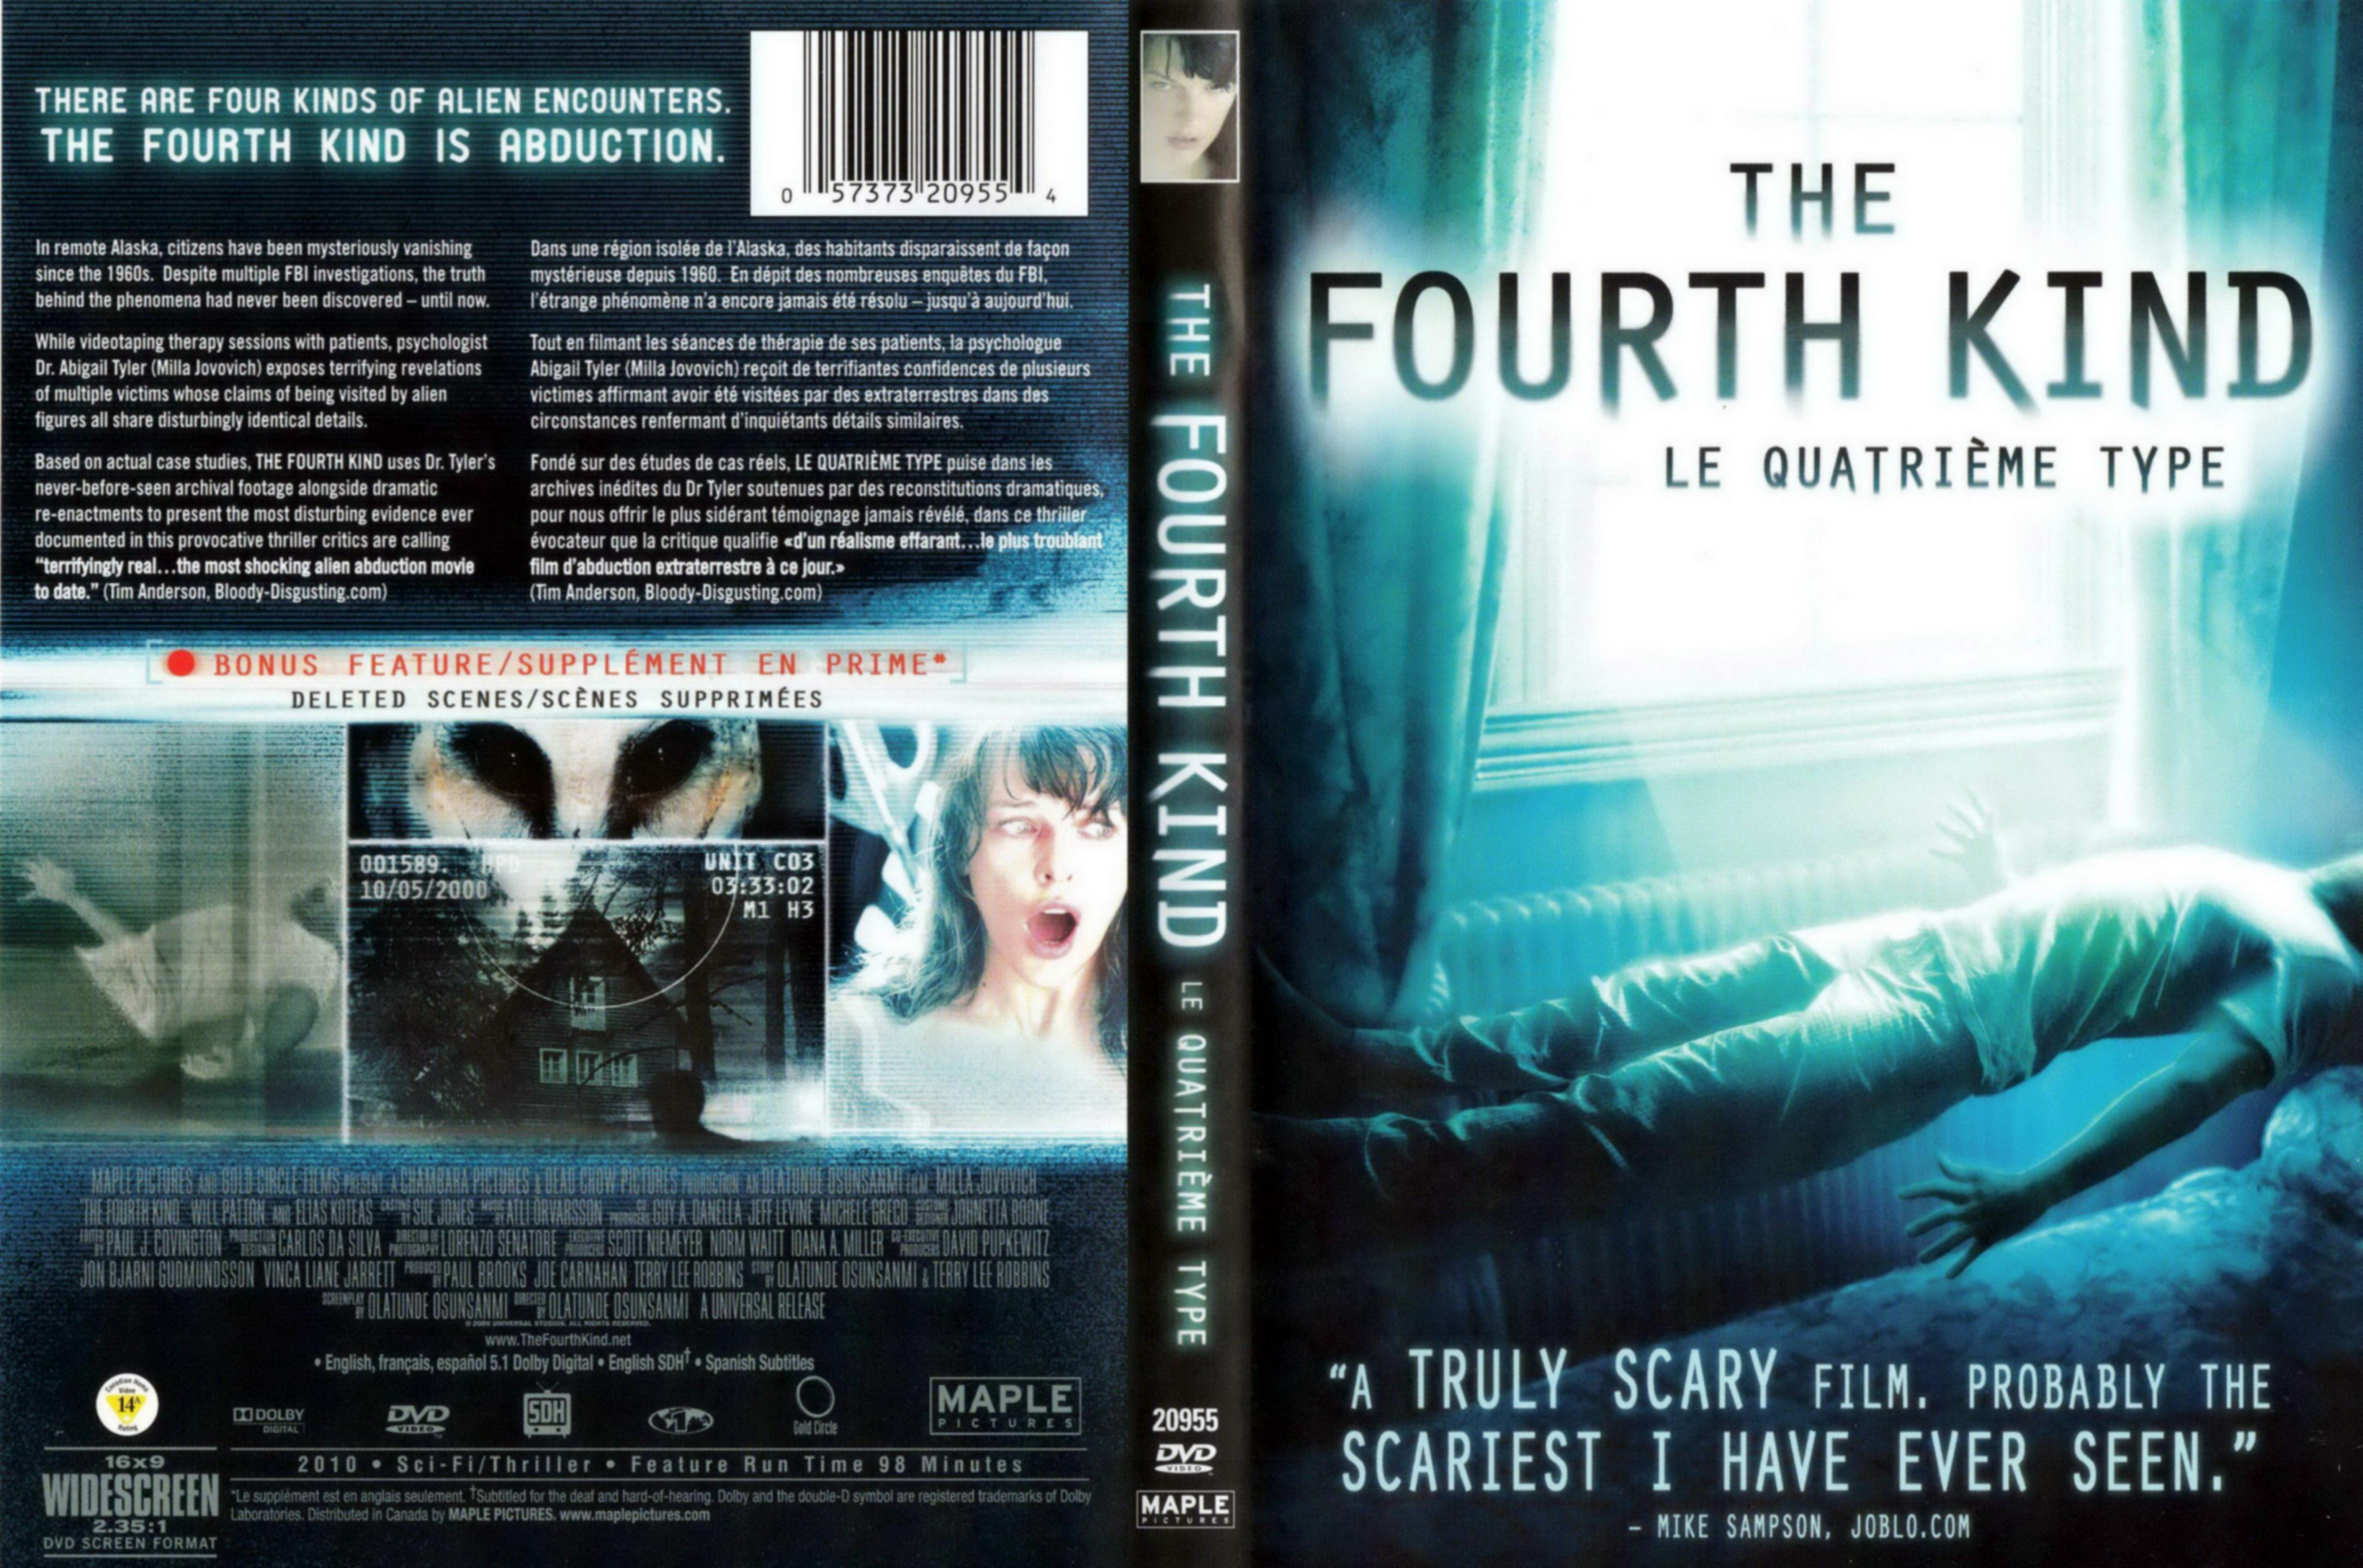 Jaquette DVD The fourth kind (Canadienne)